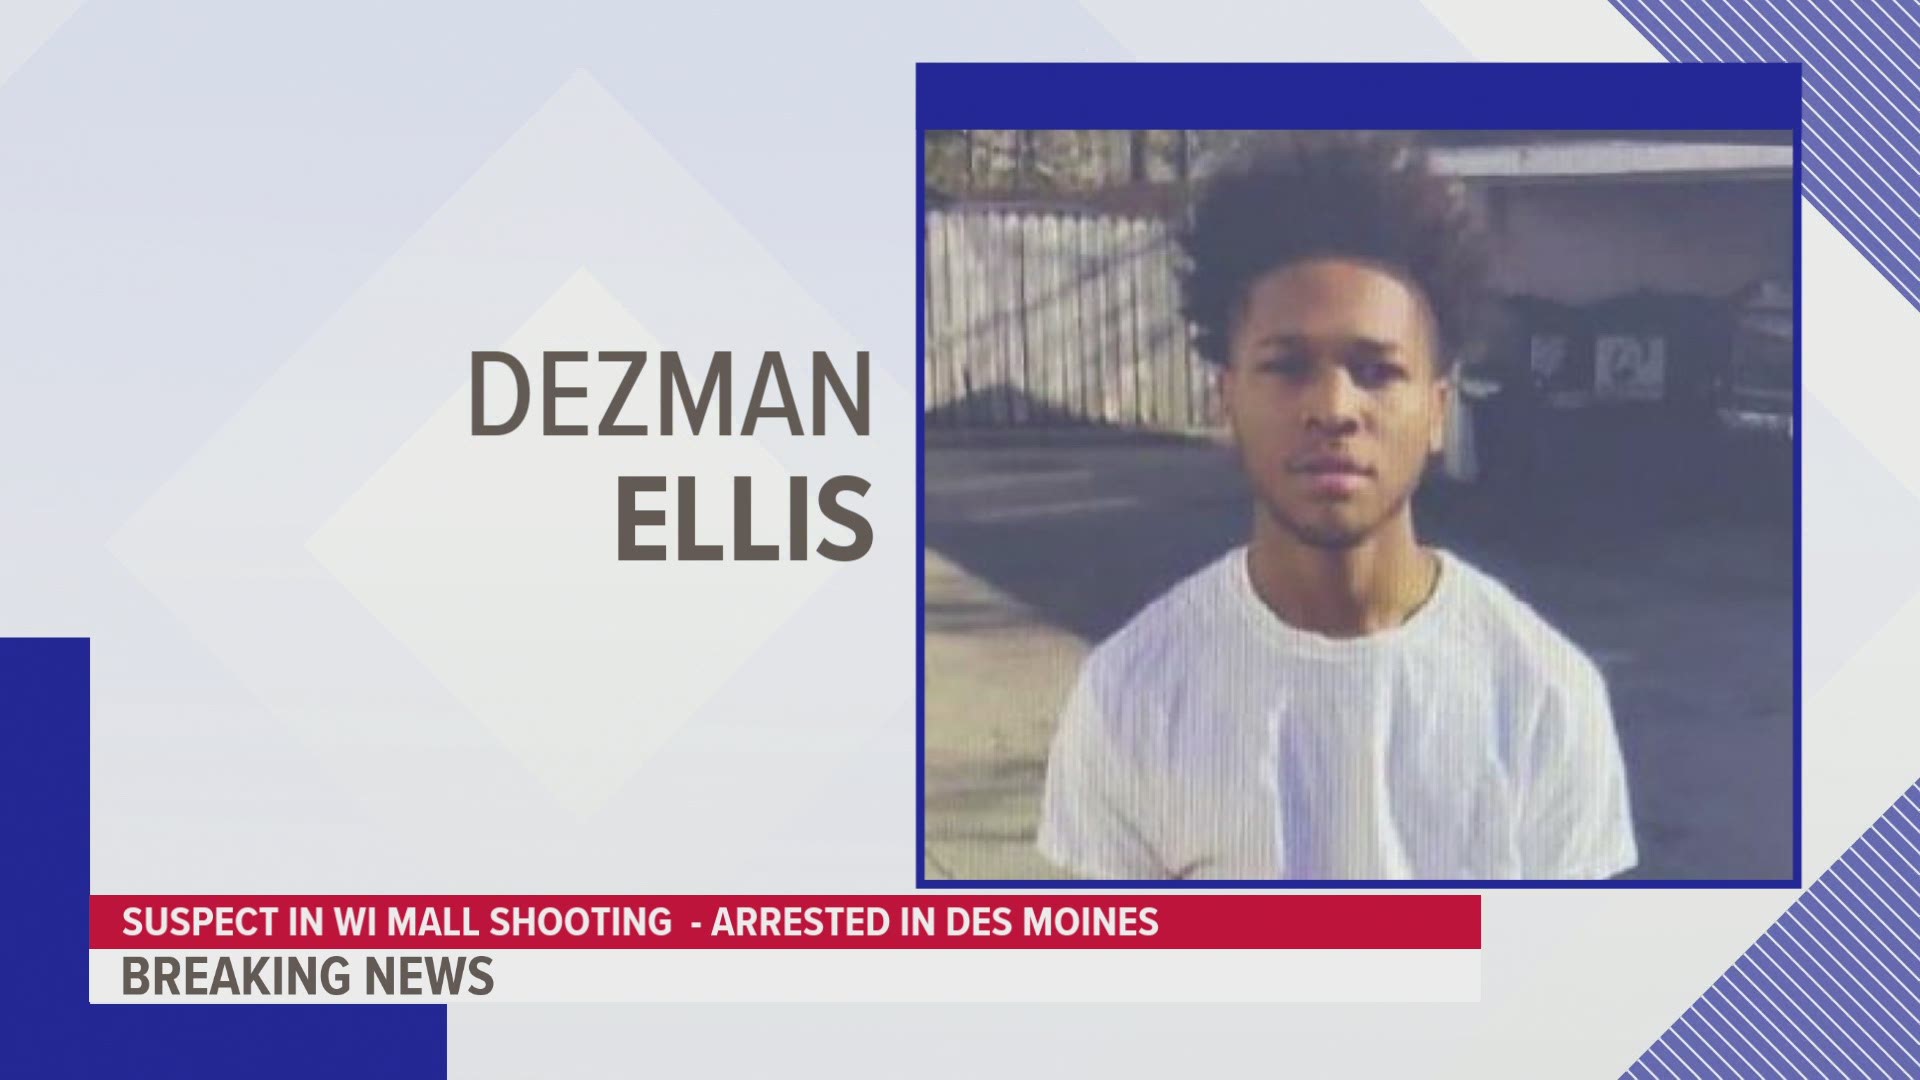 U.S. Marshals arrested the 17-year-old shooting suspect in a home in Des Moines